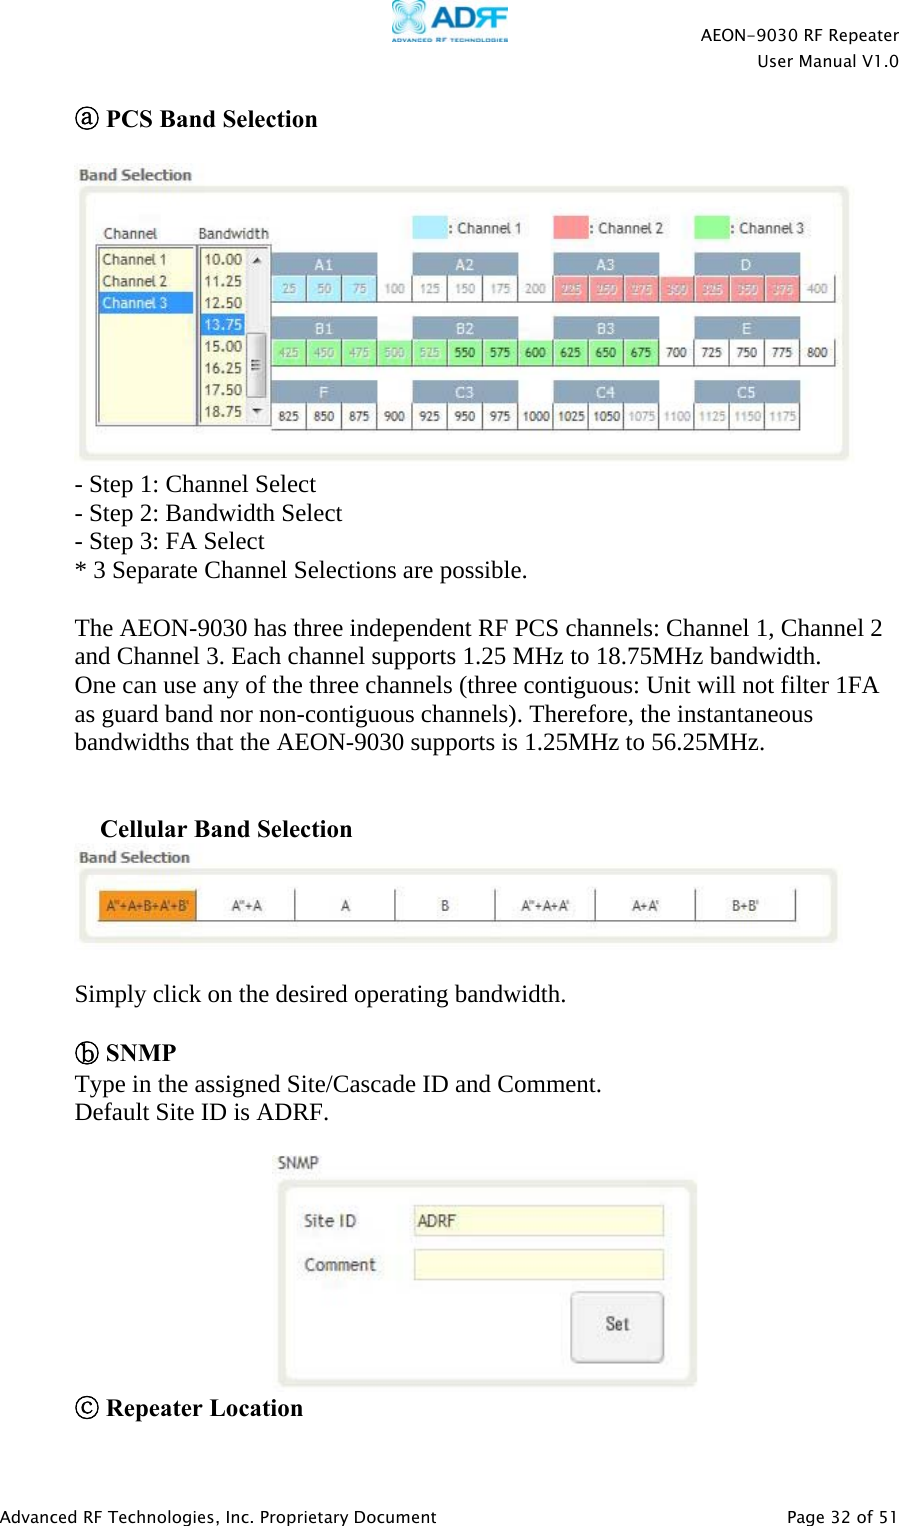    AEON-9030 RF Repeater  User Manual V1.0  Advanced RF Technologies, Inc. Proprietary Document   Page 32 of 51  ⓐ PCS Band Selection   - Step 1: Channel Select - Step 2: Bandwidth Select - Step 3: FA Select * 3 Separate Channel Selections are possible.  The AEON-9030 has three independent RF PCS channels: Channel 1, Channel 2 and Channel 3. Each channel supports 1.25 MHz to 18.75MHz bandwidth. One can use any of the three channels (three contiguous: Unit will not filter 1FA as guard band nor non-contiguous channels). Therefore, the instantaneous bandwidths that the AEON-9030 supports is 1.25MHz to 56.25MHz.    Cellular Band Selection   Simply click on the desired operating bandwidth.  ⓑ SNMP Type in the assigned Site/Cascade ID and Comment. Default Site ID is ADRF.   ⓒ Repeater Location 